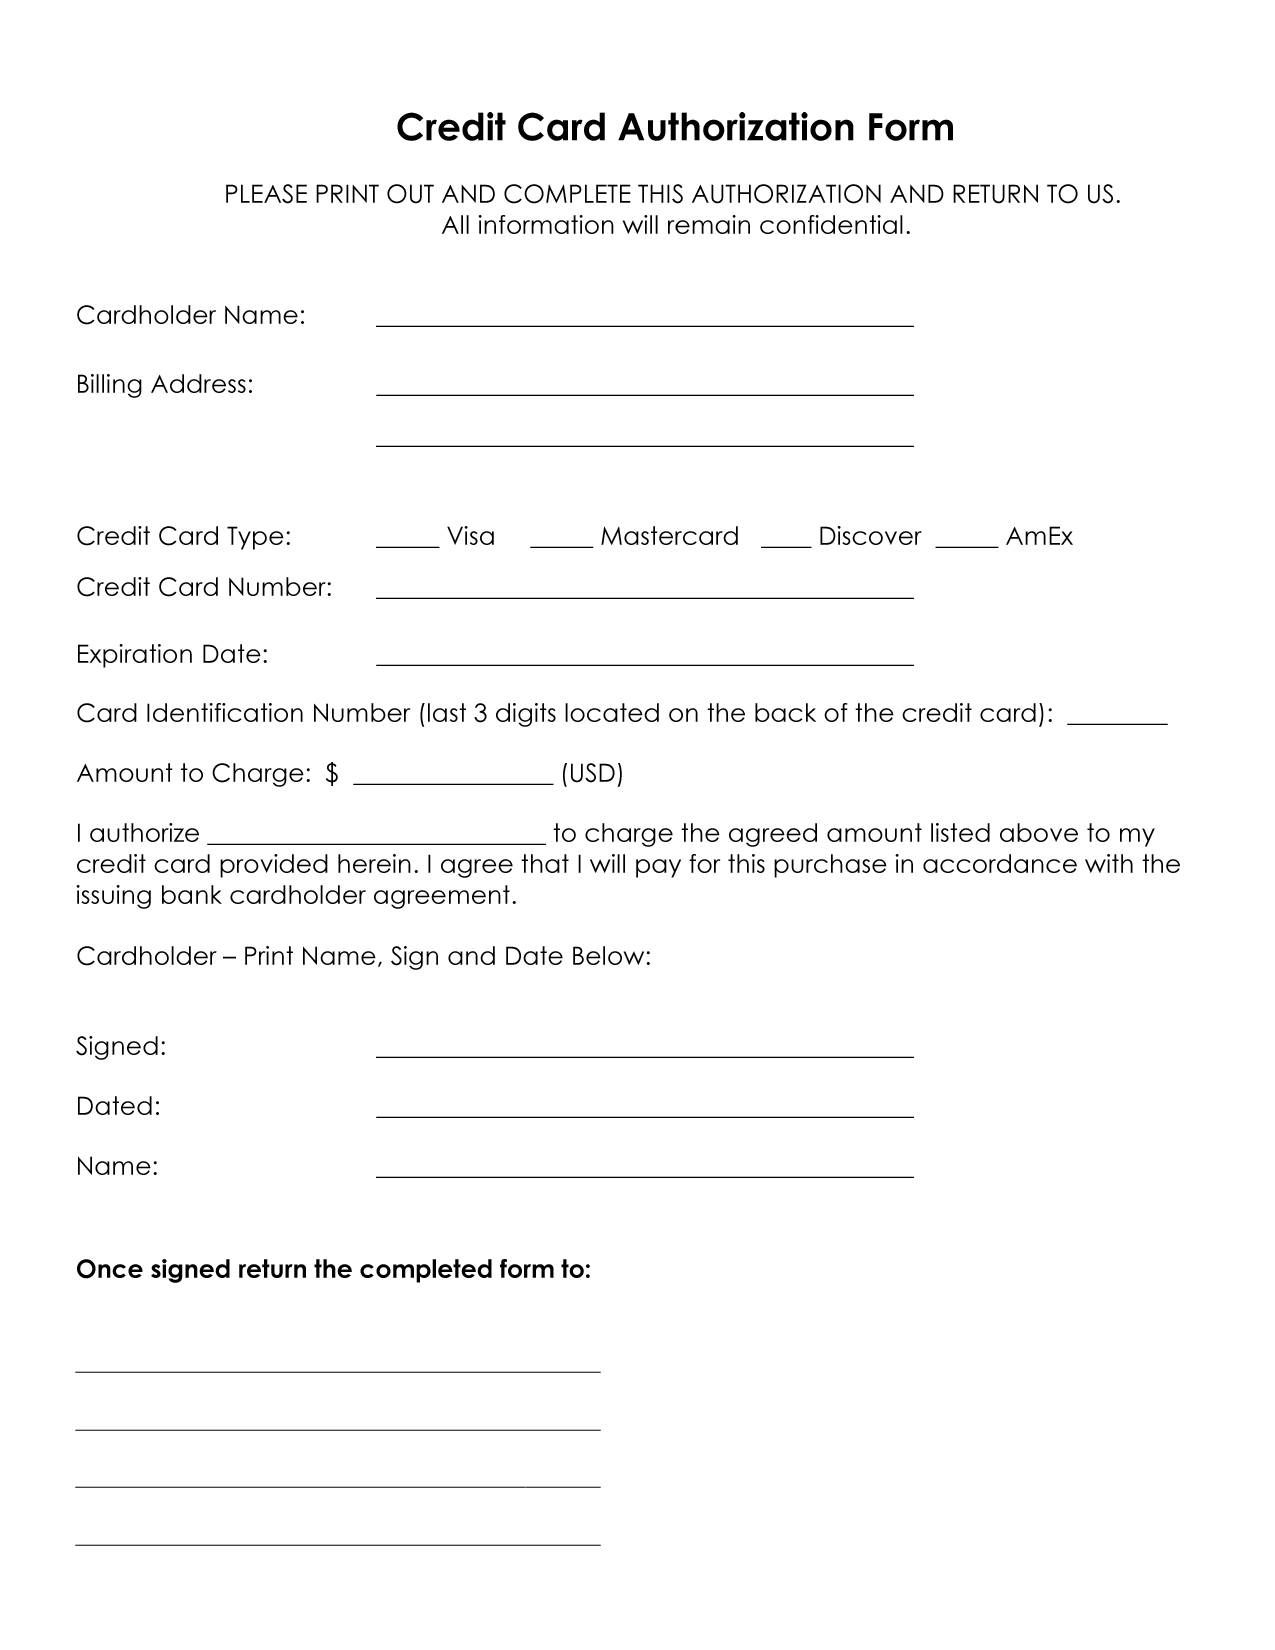 Credit Card Authorization Form Template In 2020 | Credit Intended For Credit Card Authorisation Form Template Australia